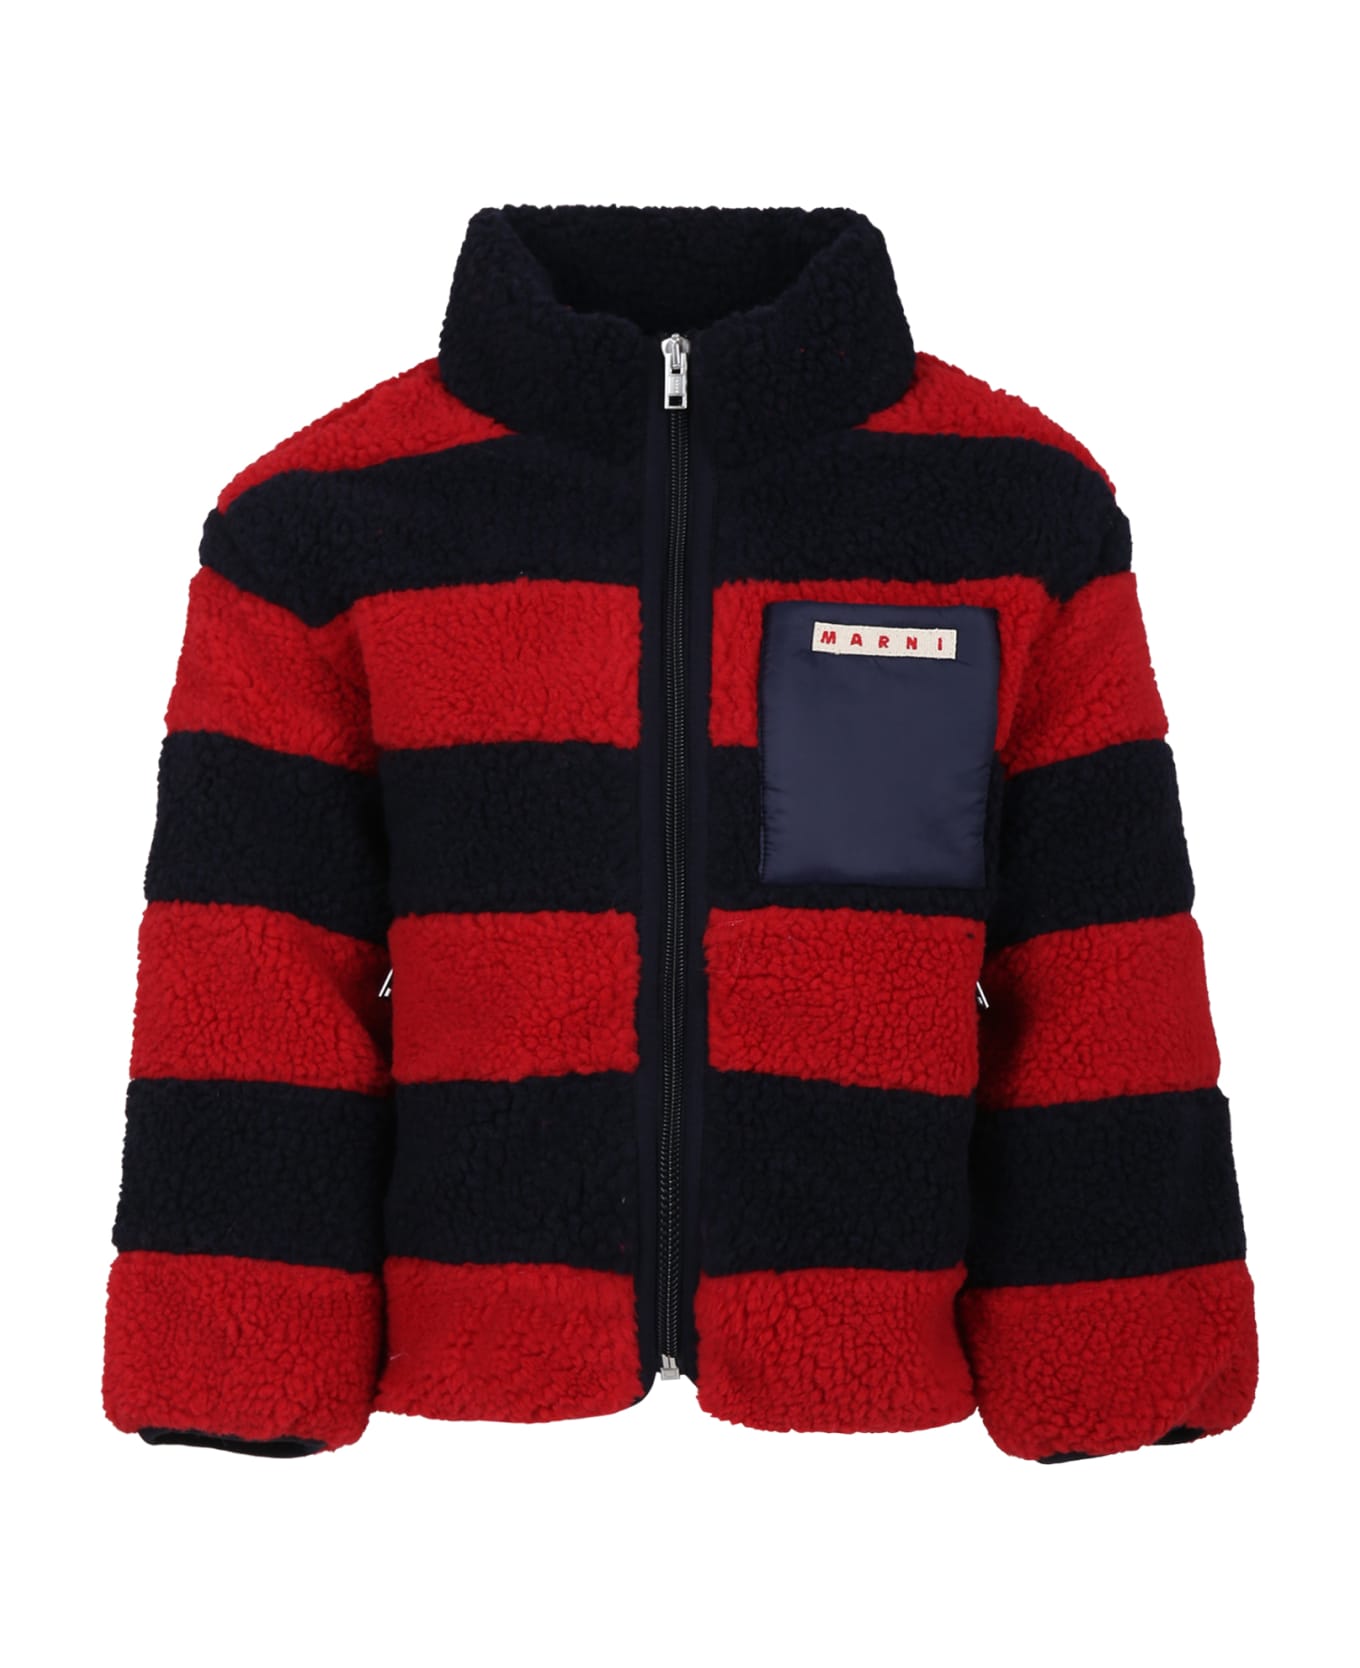 Marni Red Faux Fur Coat For Kids With Logo - Multicolor